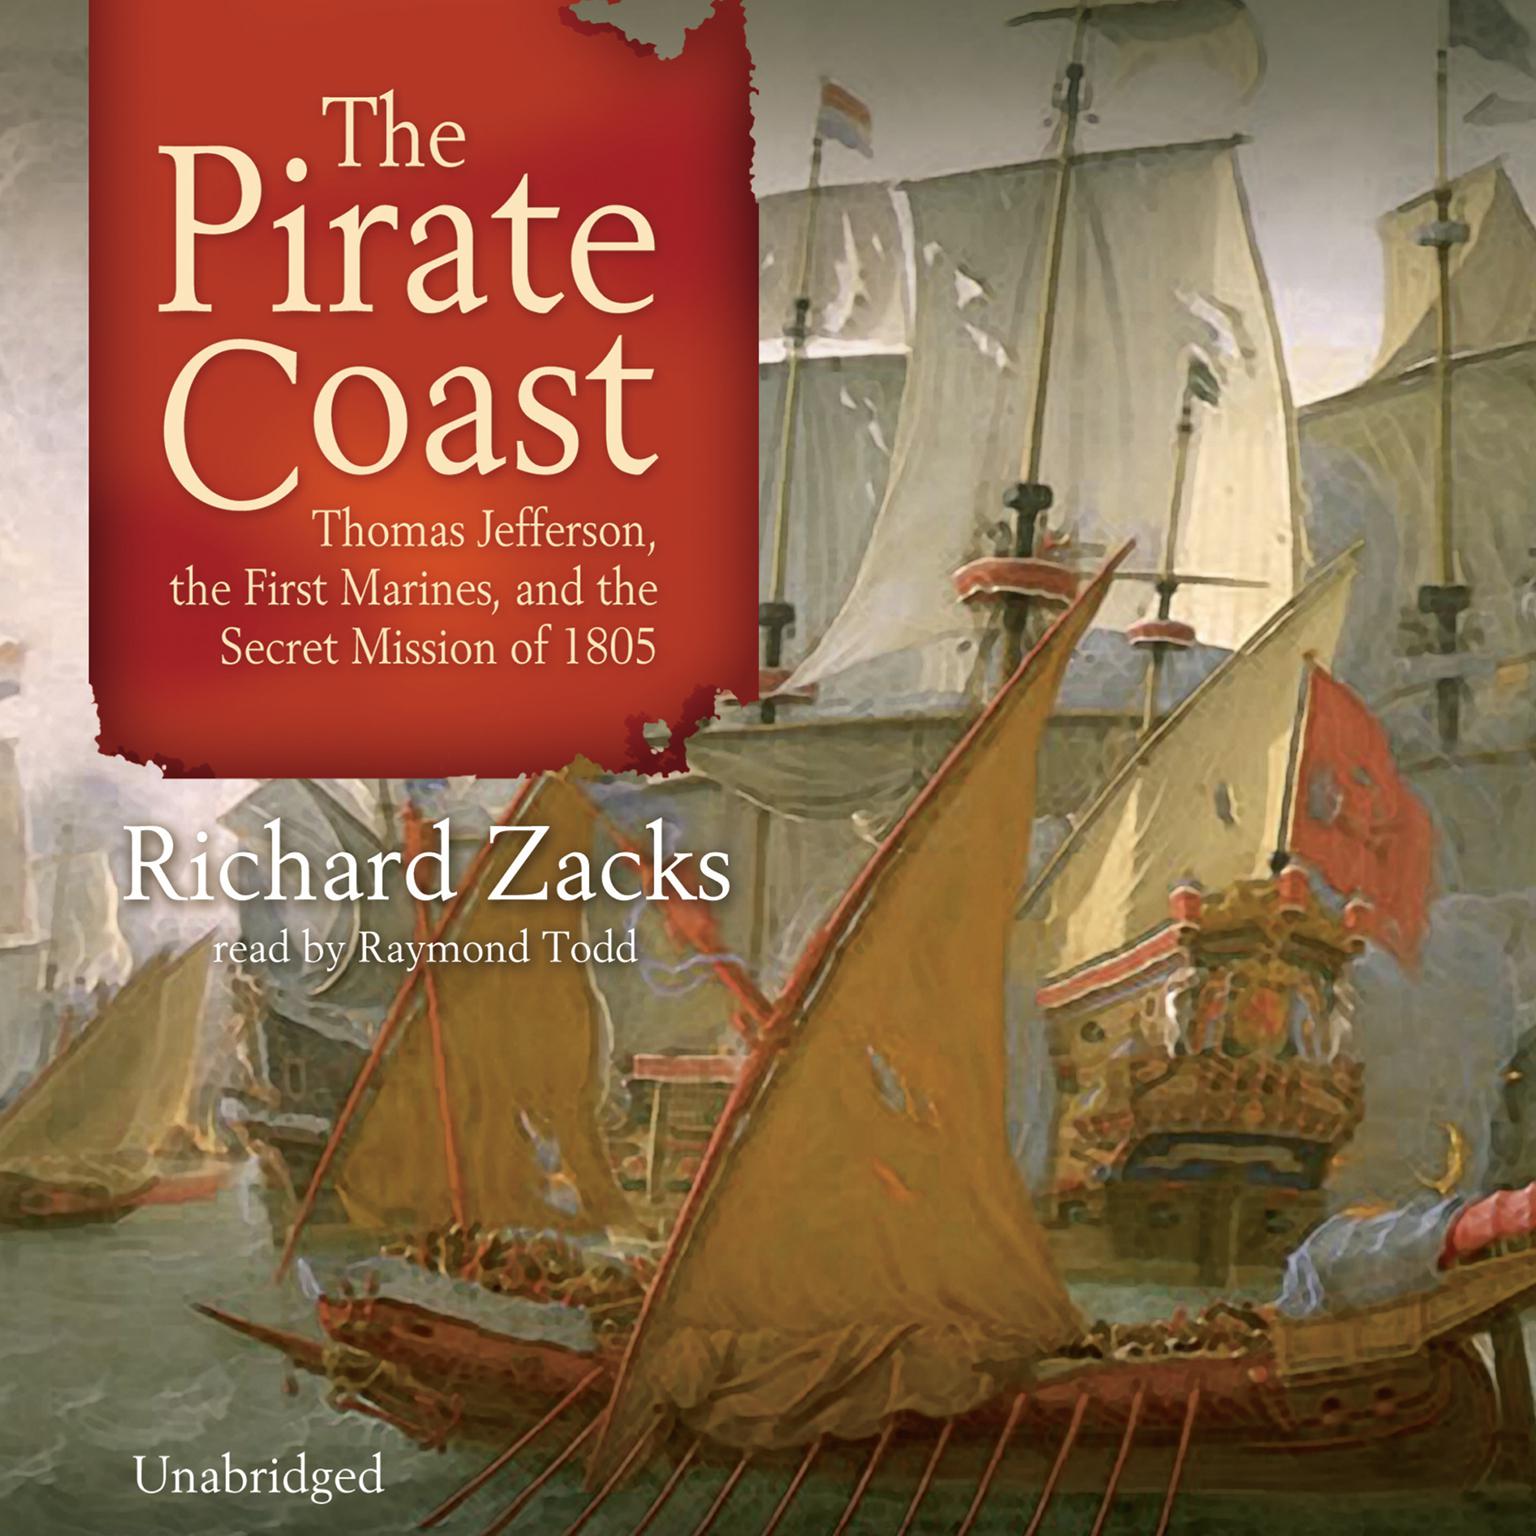 The Pirate Coast: Thomas Jefferson, the First Marines, and the Secret Mission of 1805 Audiobook, by Richard Zacks